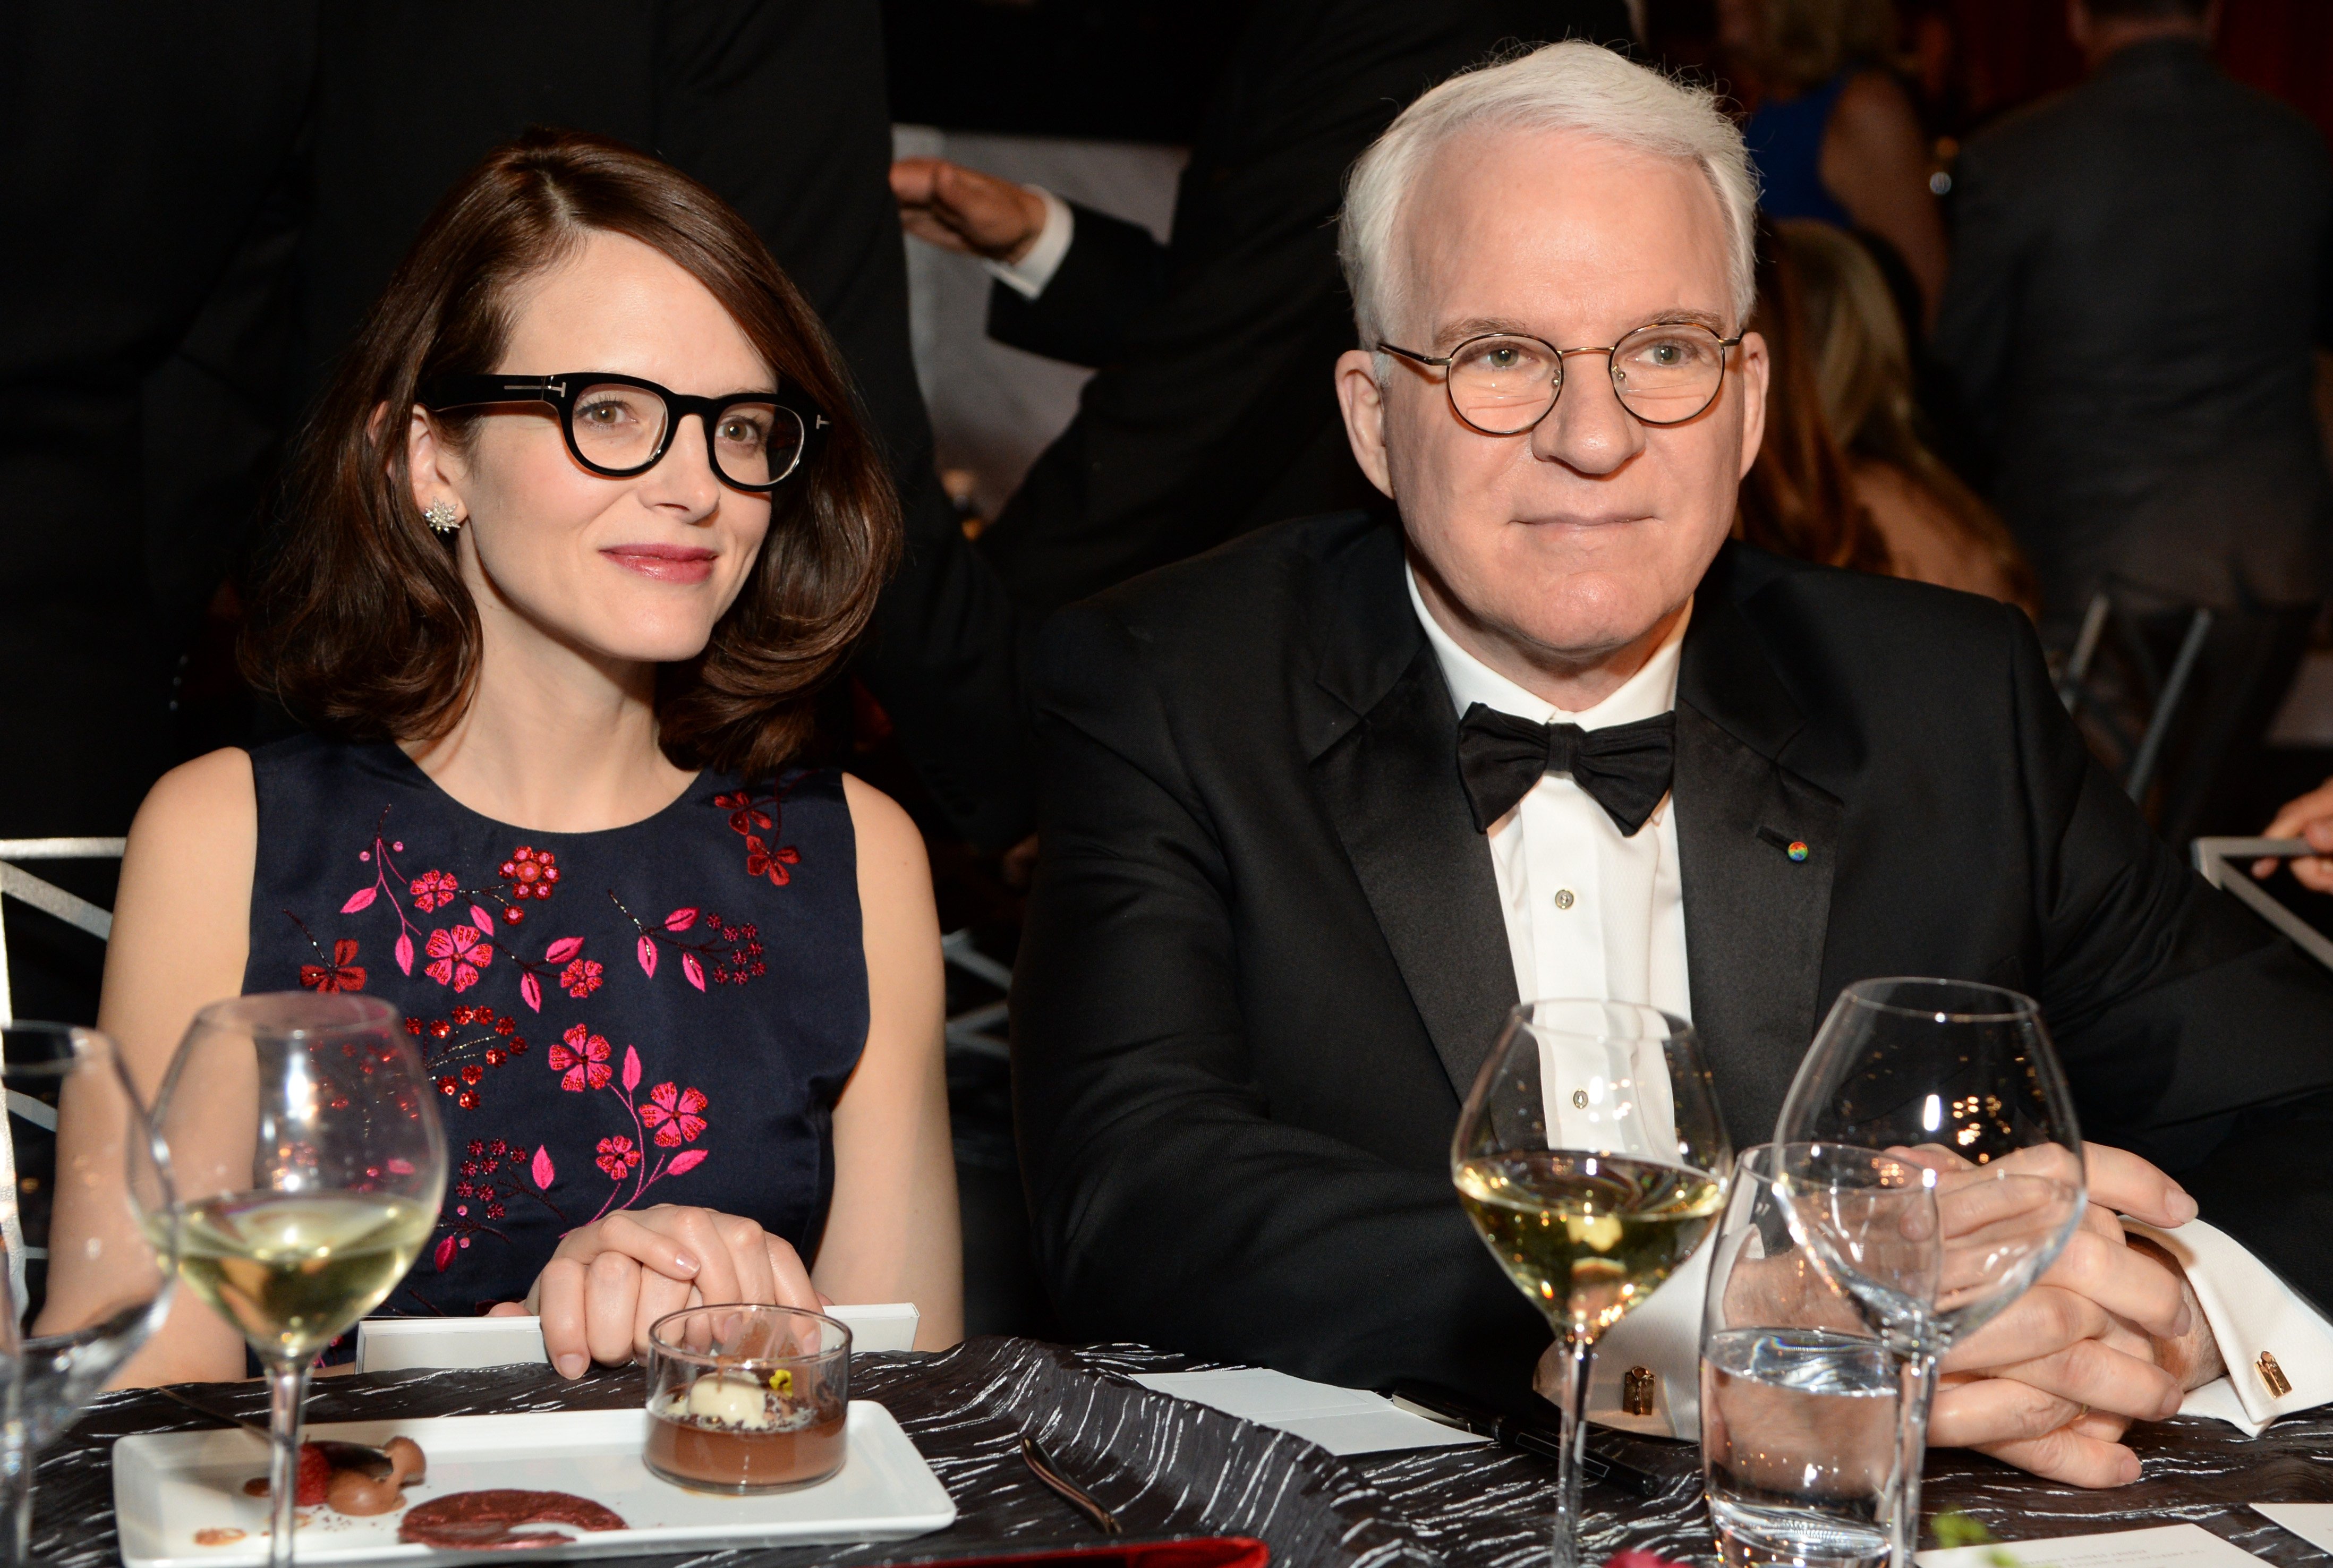 Writer Anne Stringfield (L) and honoree Steve Martin attend the 43rd AFI Life Achievement Award Gala honoring Steve Martin on June 4, 2015 in Hollywood, California. | Source: Getty Images